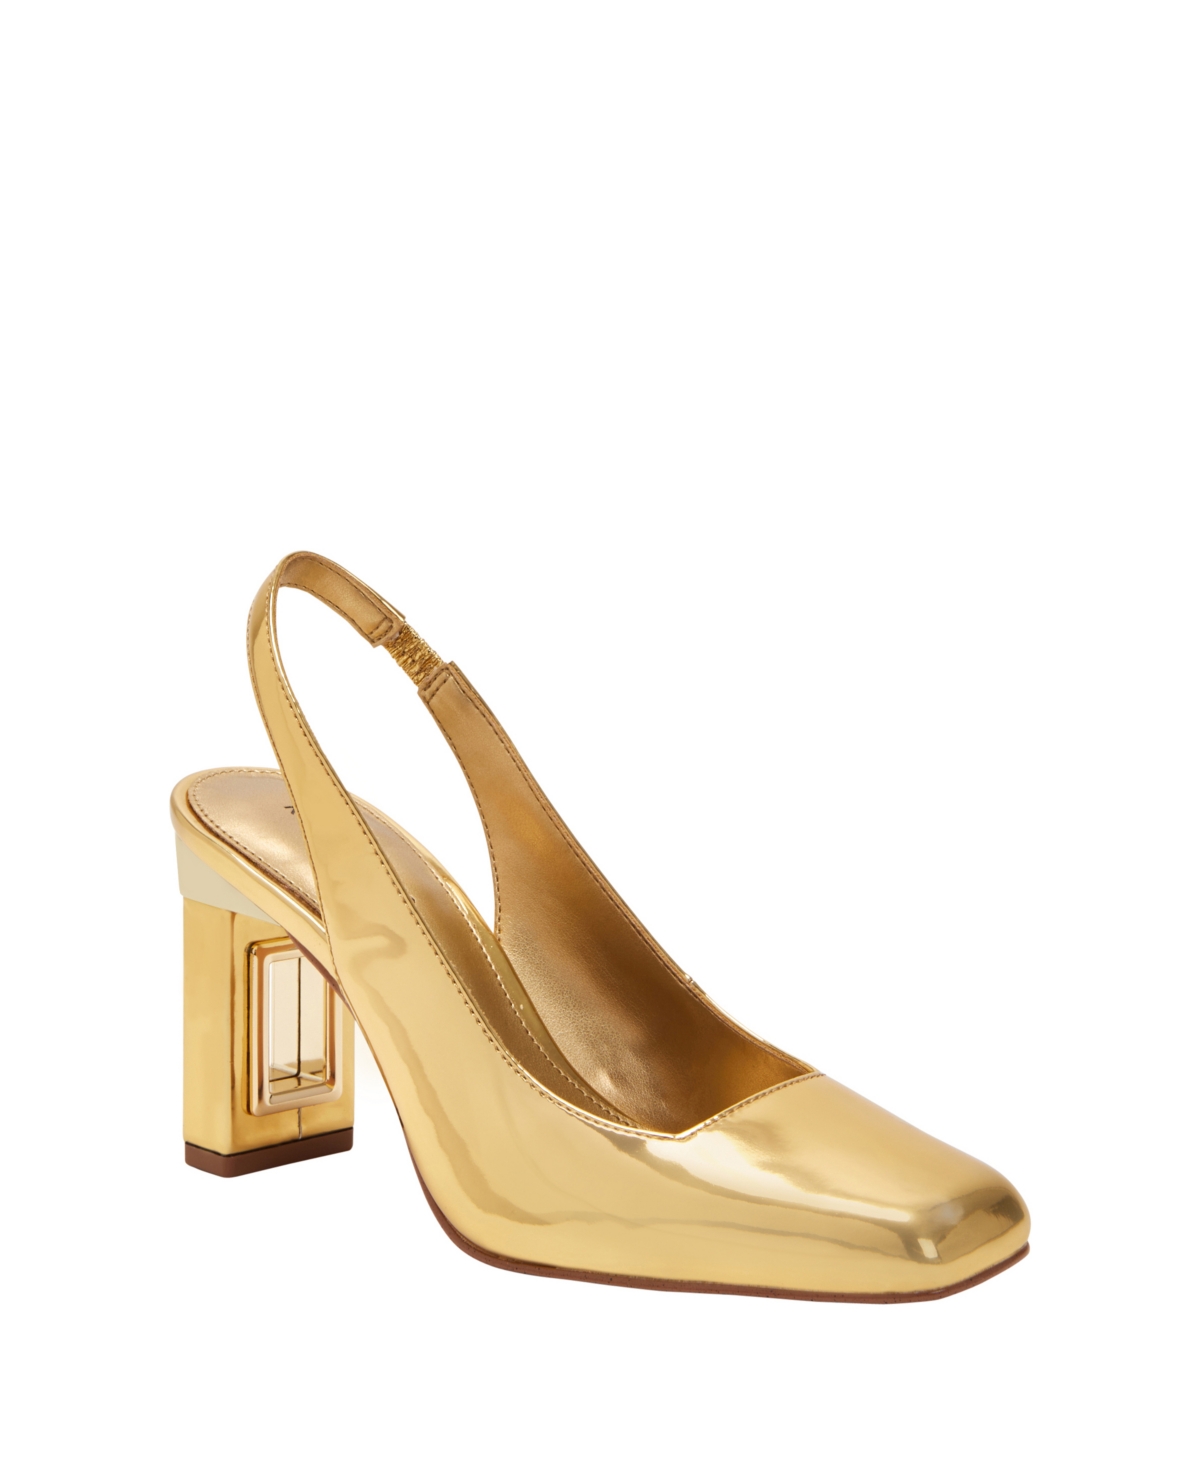 Women's The Hollow Heel Sling Back Pumps - Gold- Polyurethane, Polyester